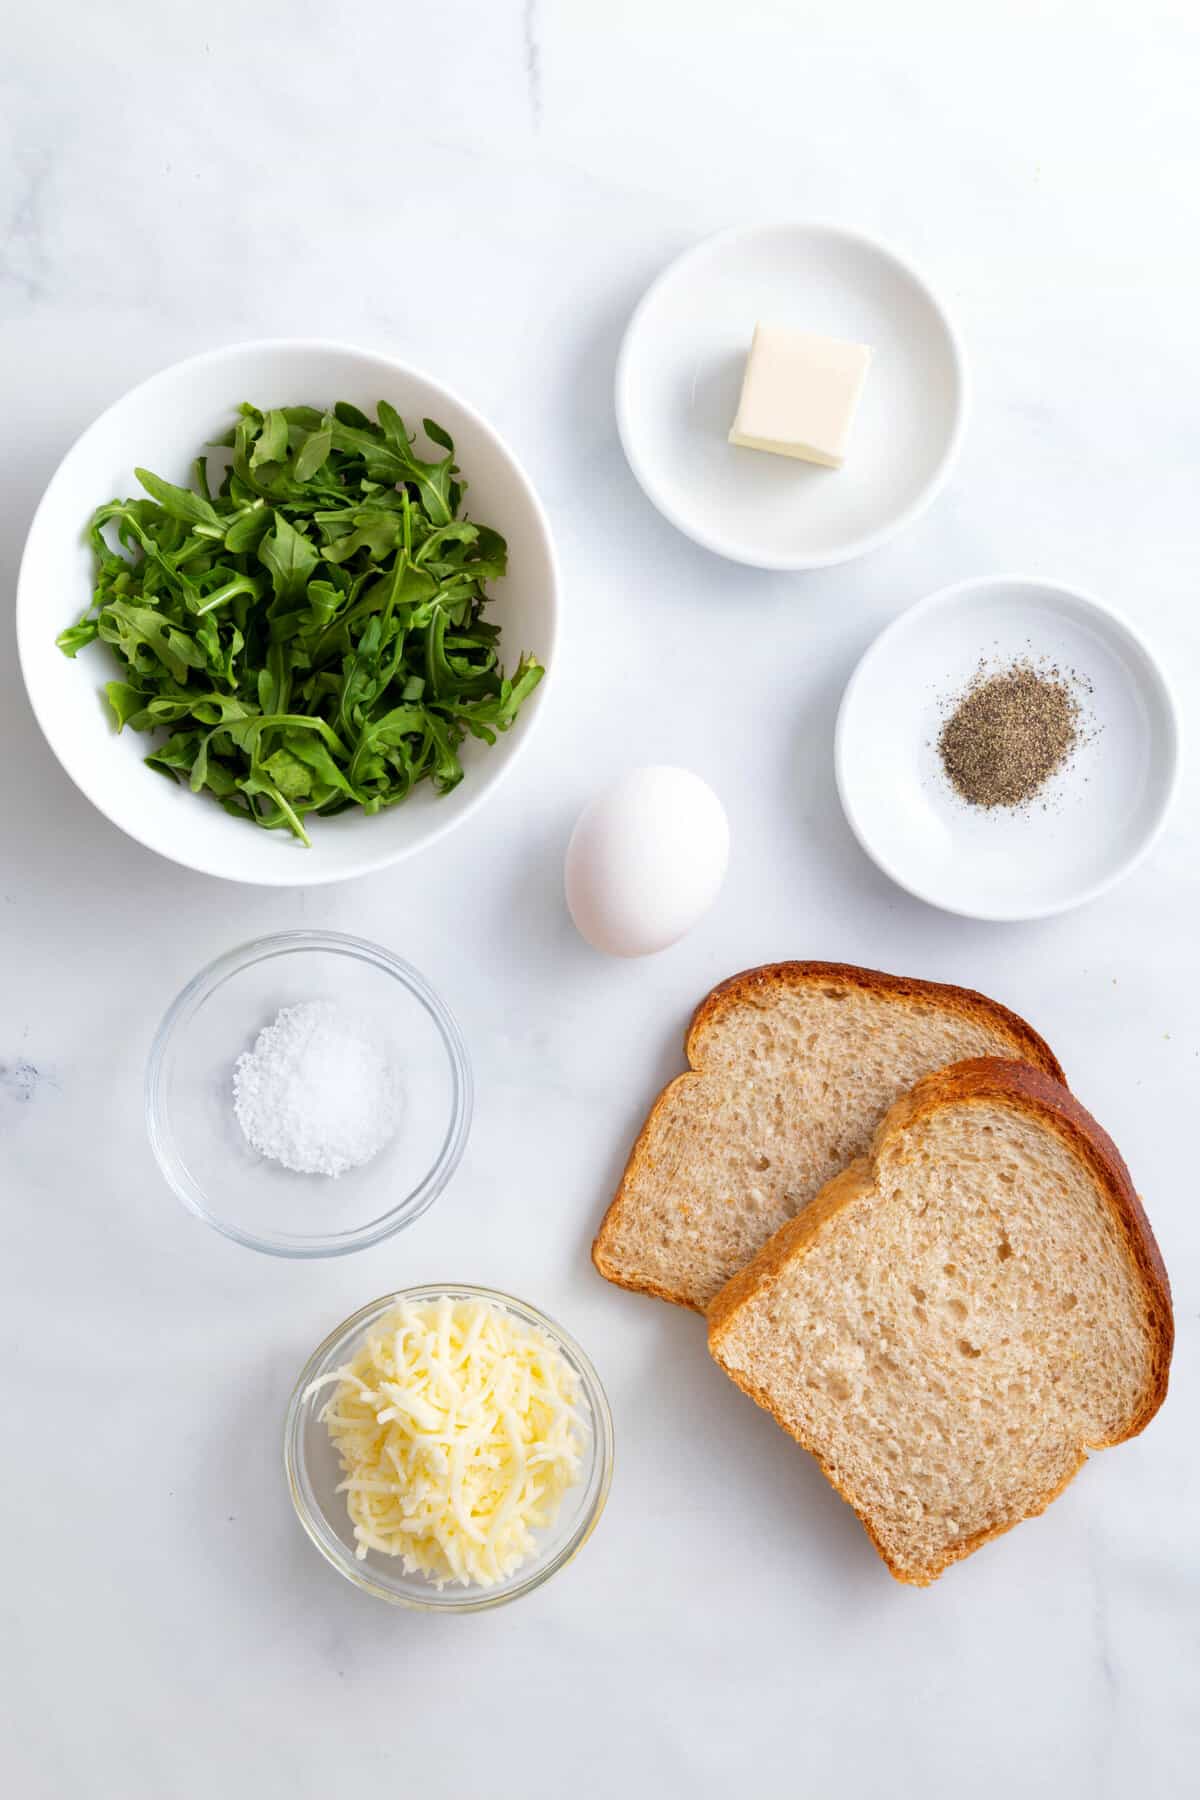 ingredients to make fried egg and cheese sandwich